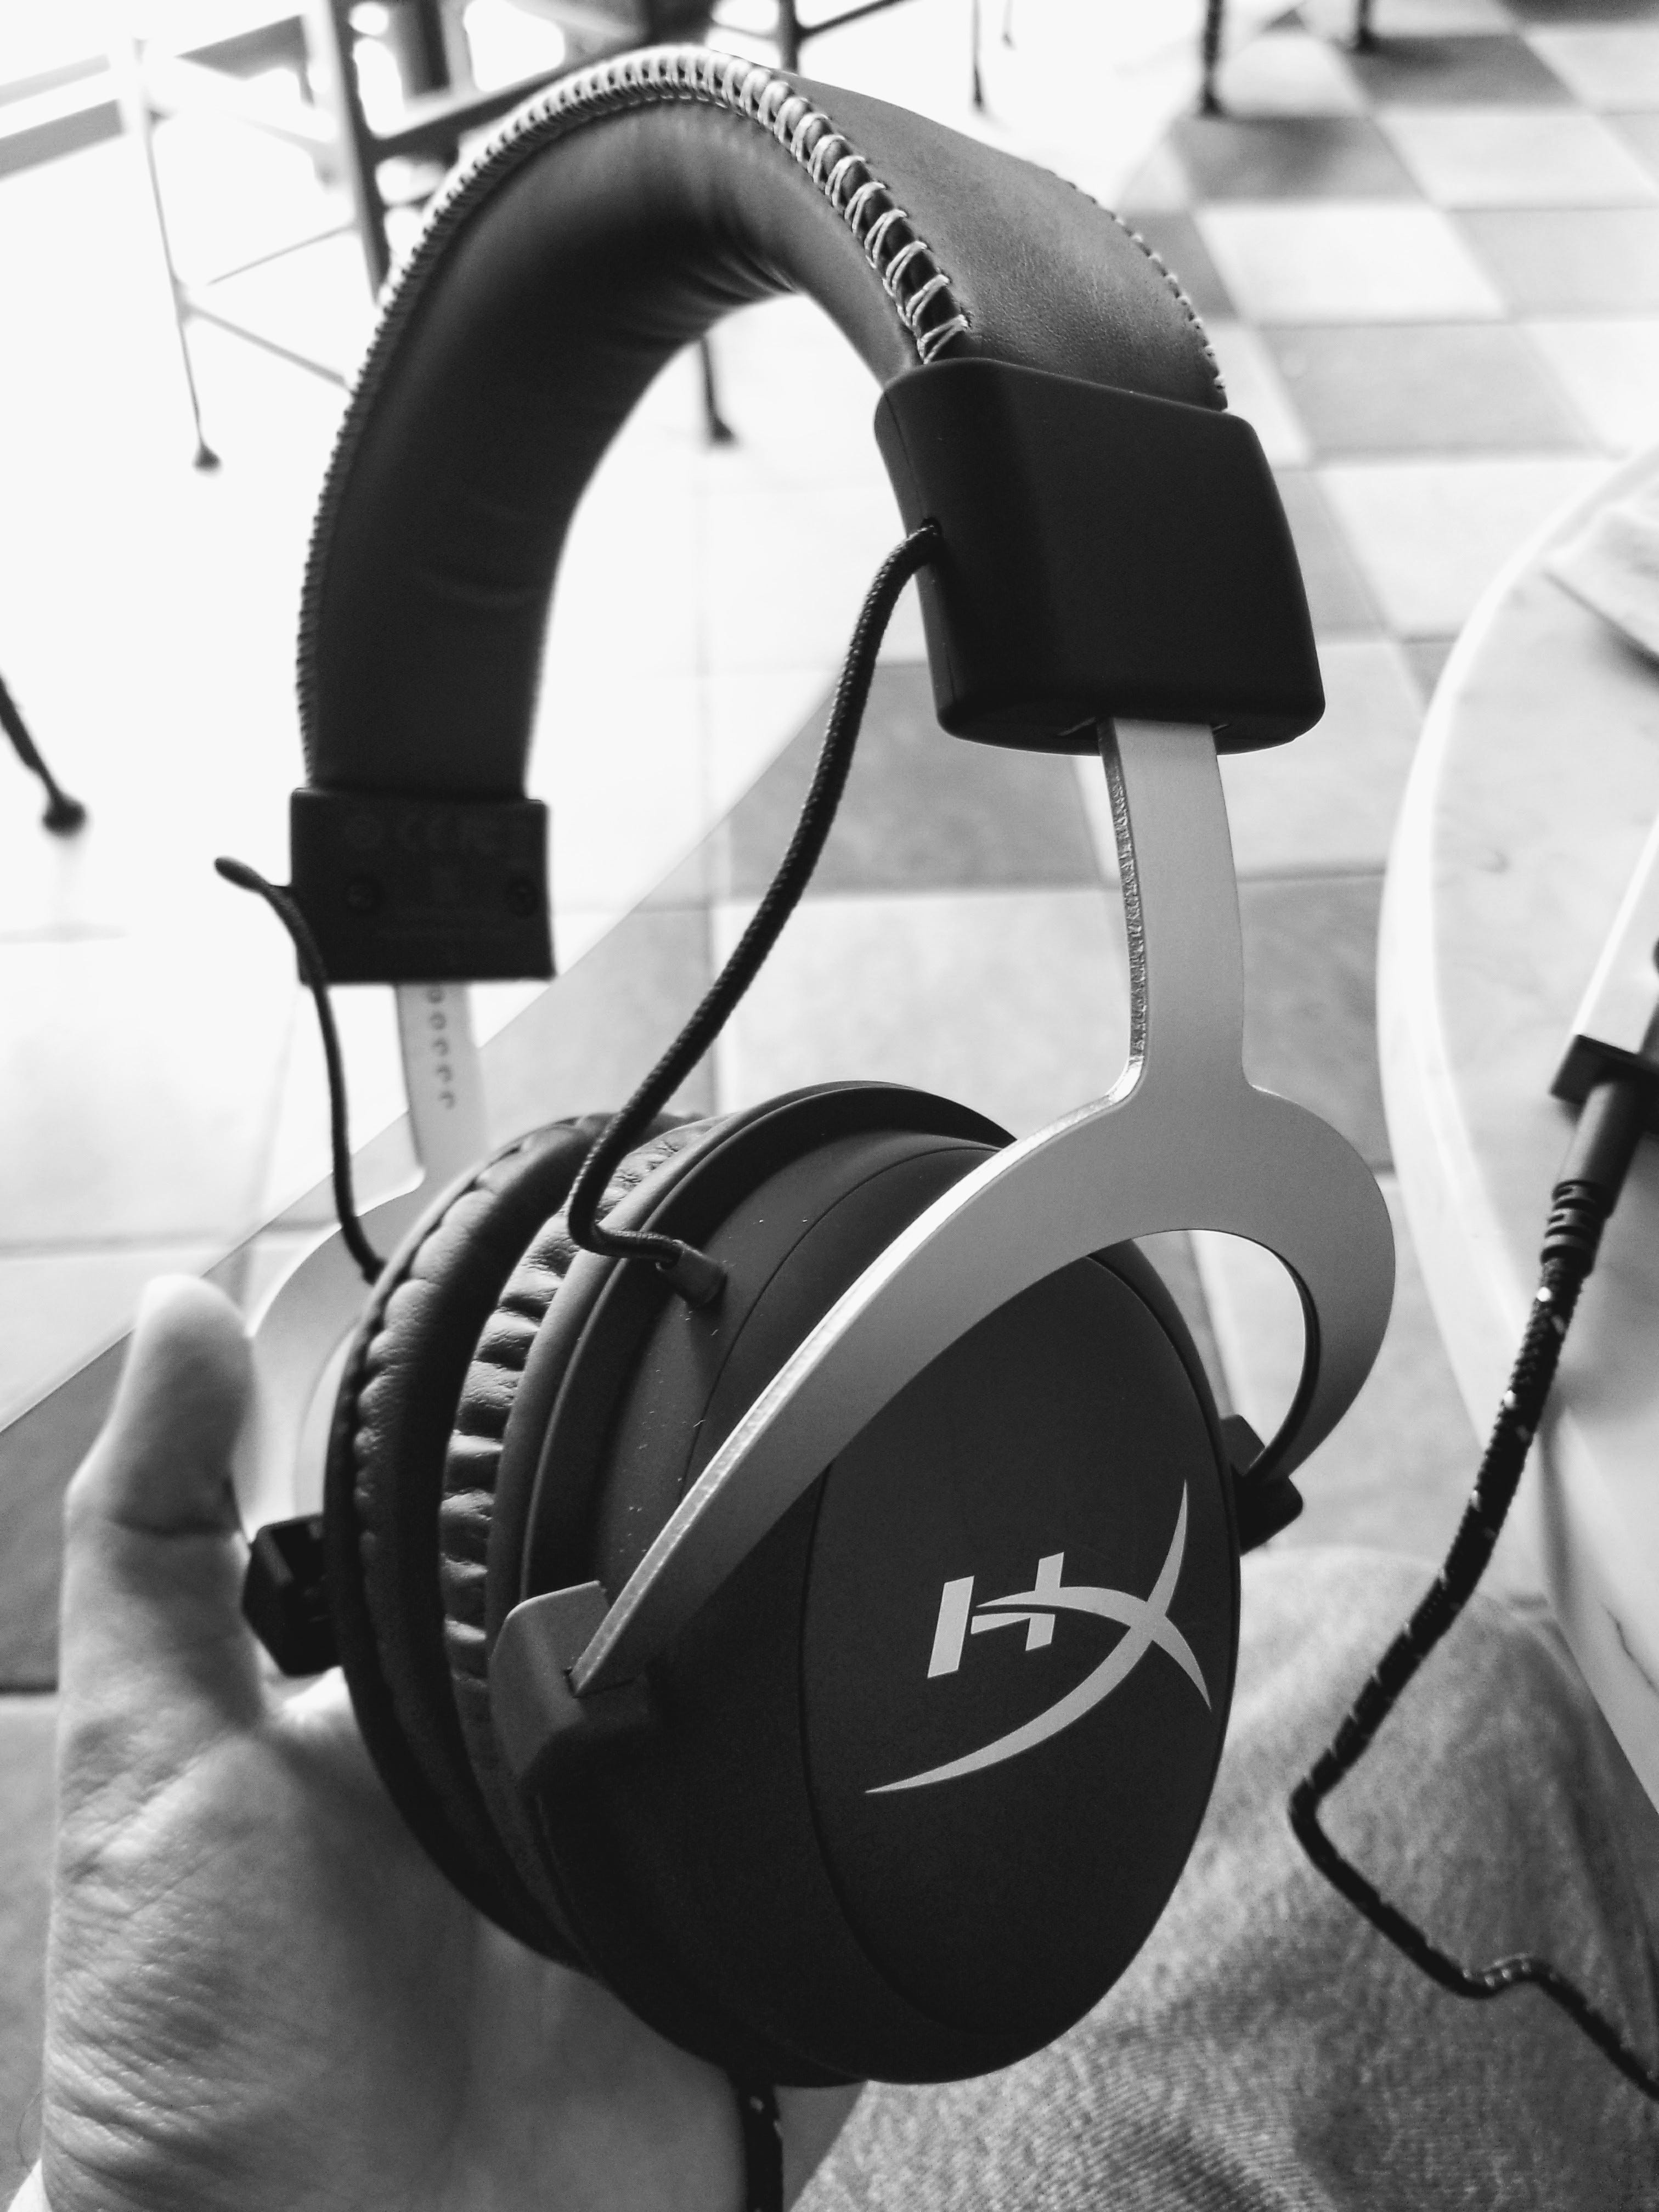 The Best Hyperx Headsets Both Wireless And Wired Options Debated By Alex Rowe Medium